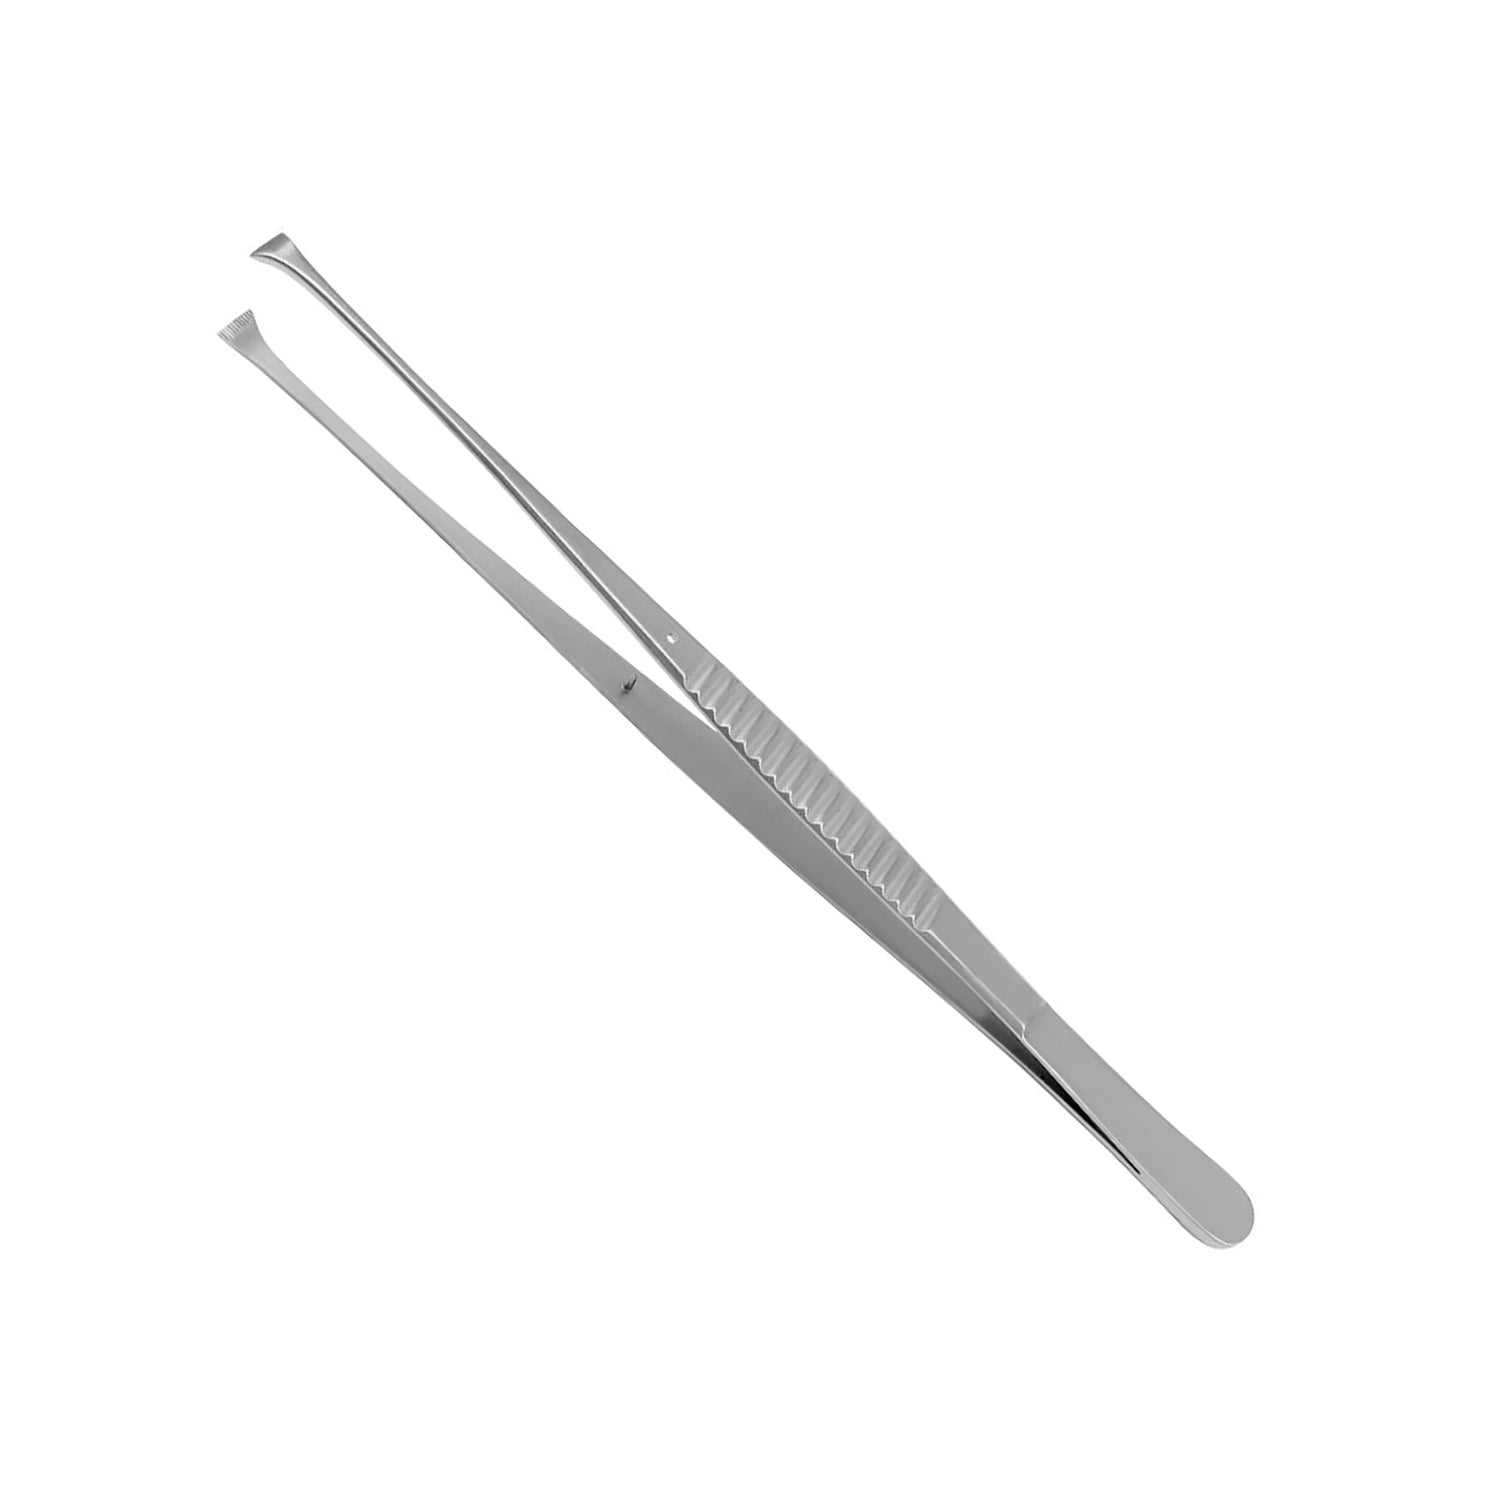 Nelson Lung Tissue Forceps